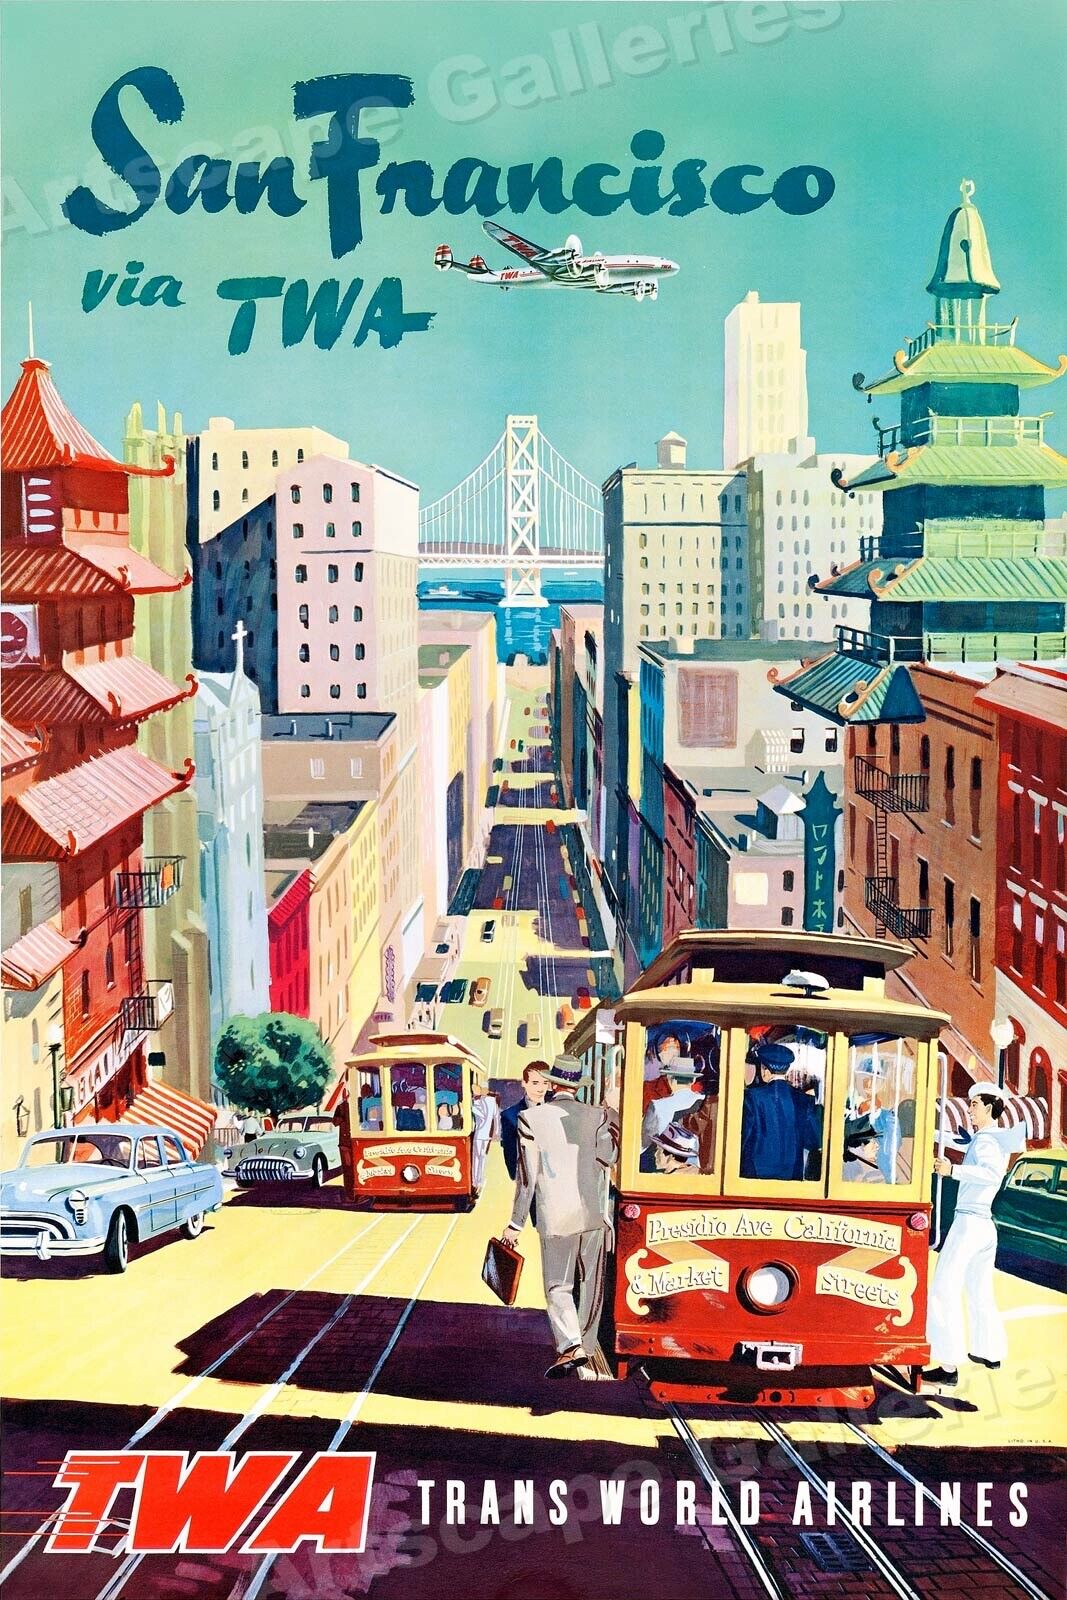 San Francisco Chinatown 1950s Vintage Style Travel Poster - 20x30